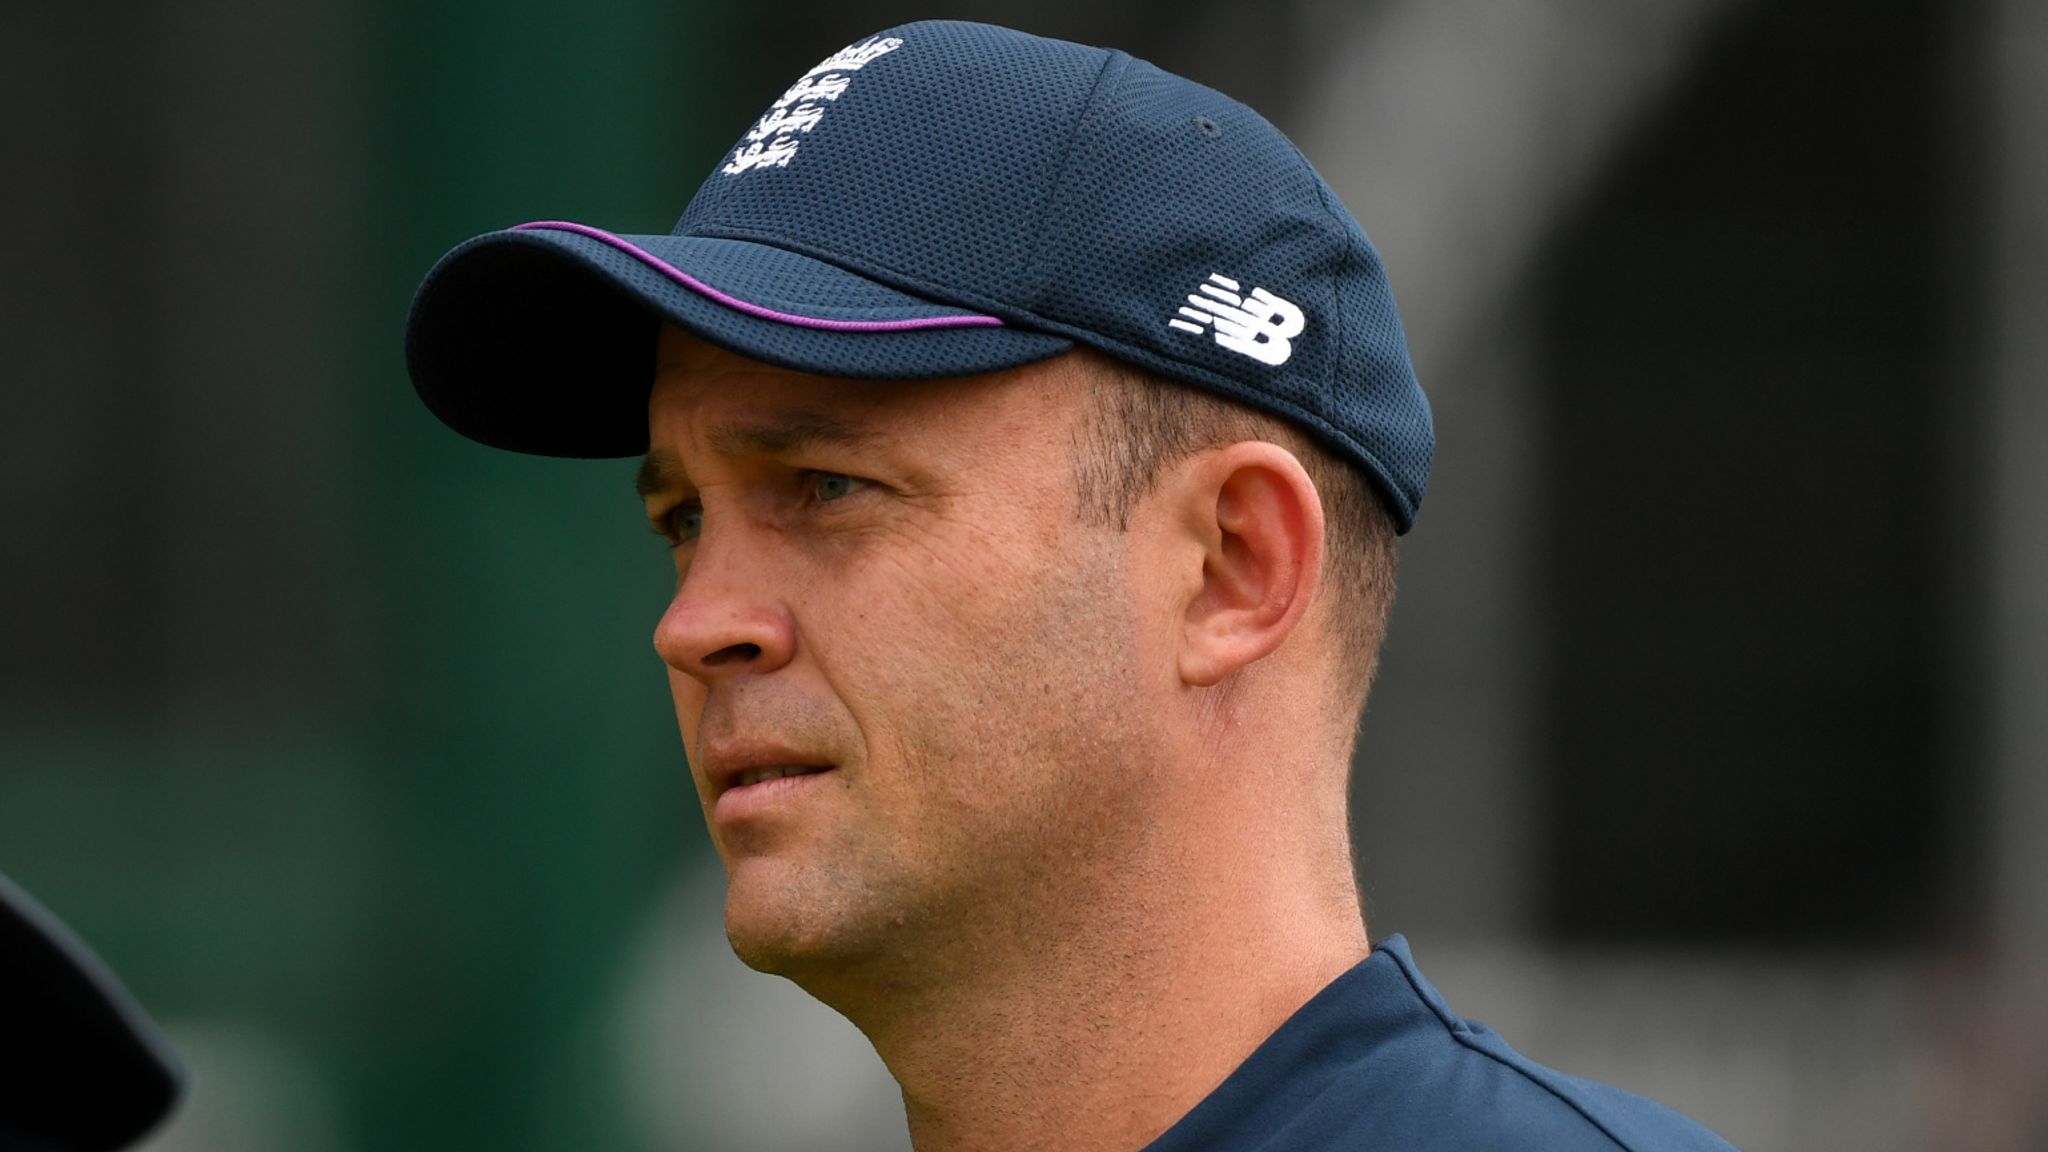 IRE vs AFG: Former England batter Jonathan Trott appointed as the head coach of Afghanistan